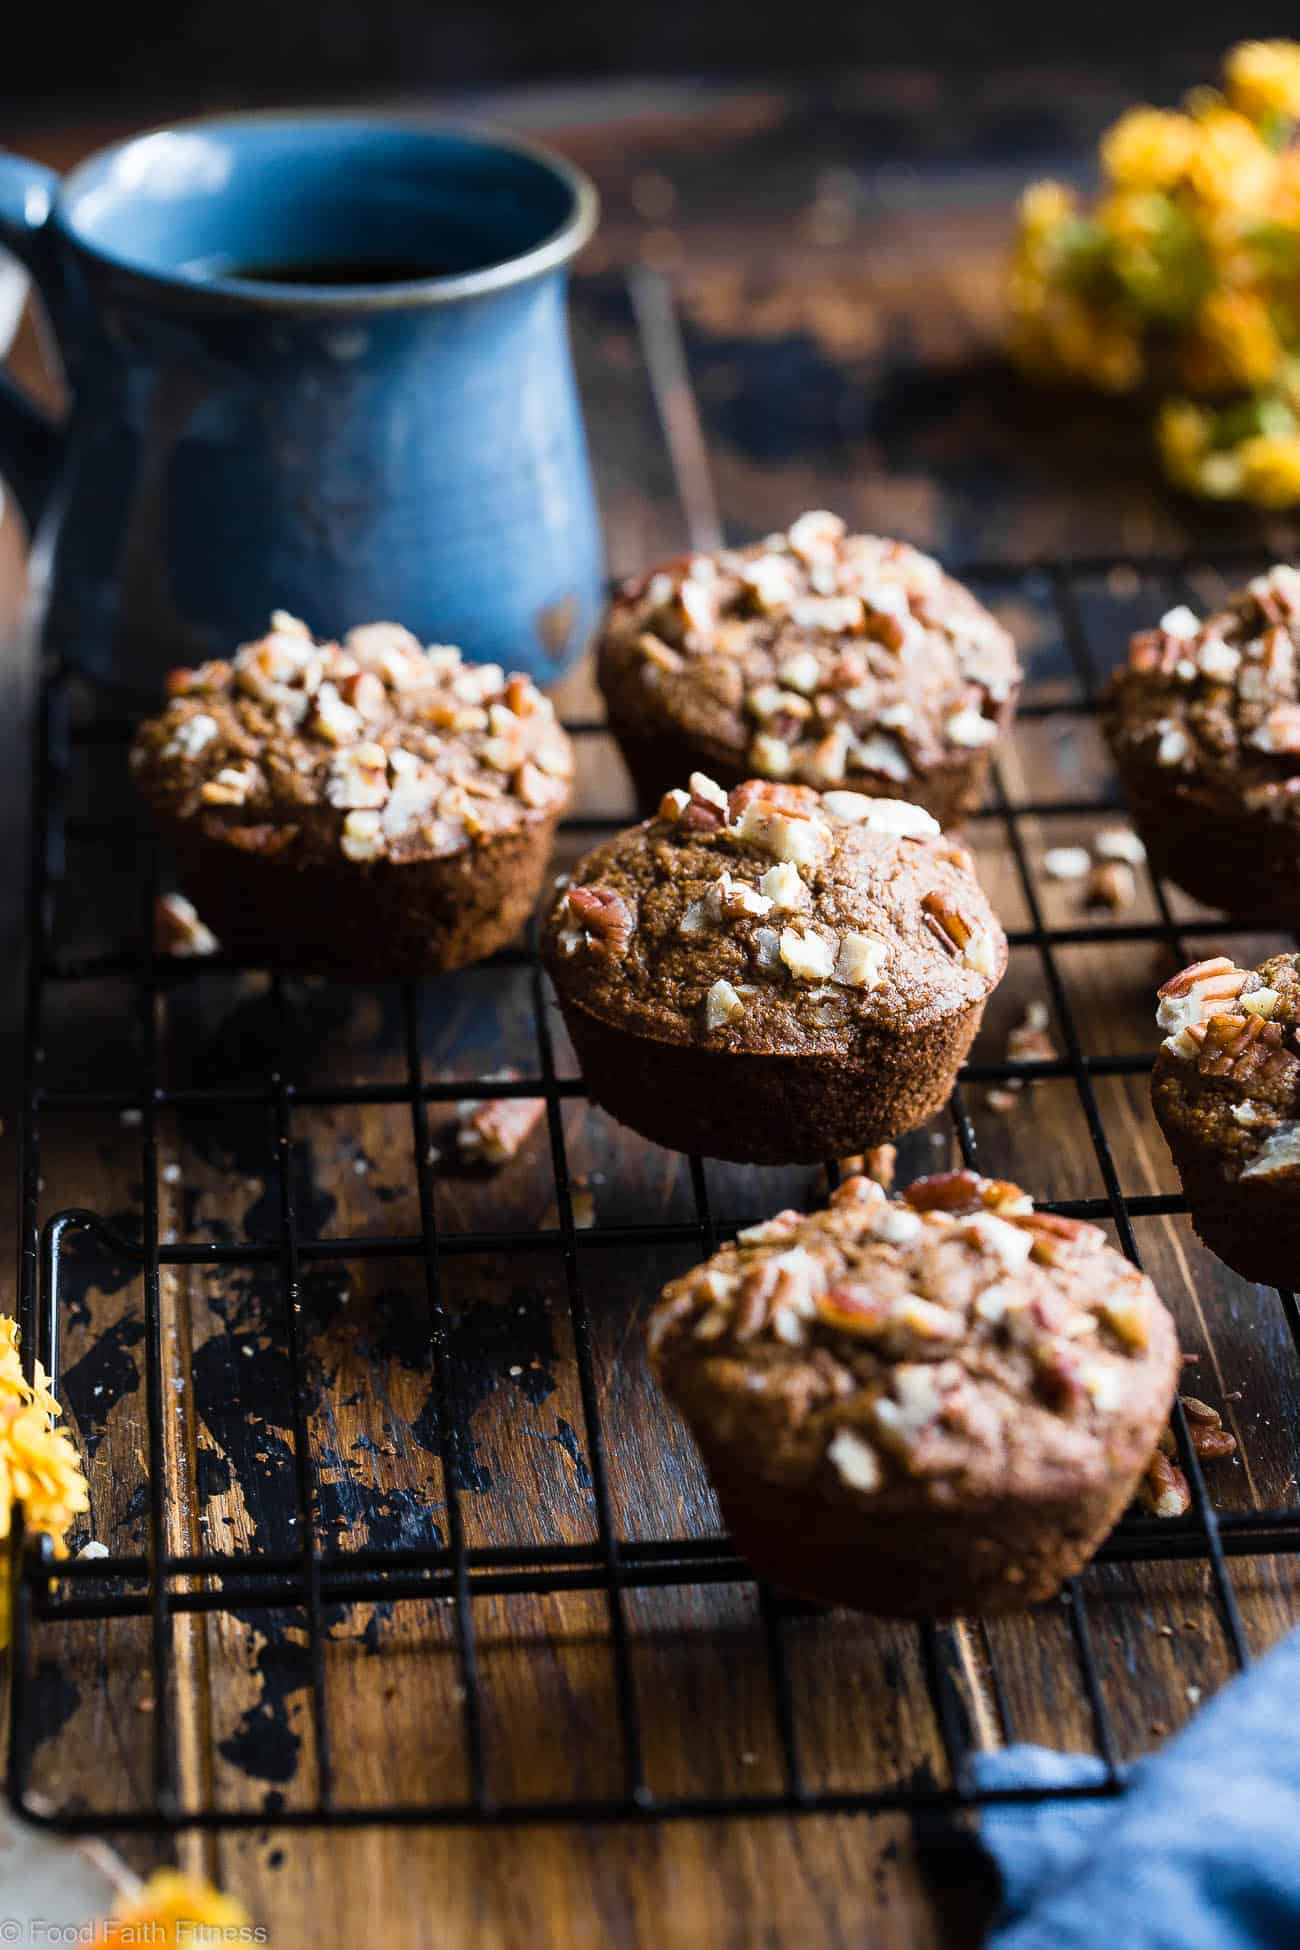 Easy Healthy Gluten Free Carrot Cake Muffins - These easy carrot muffins are quick, simple and made from pantry-essential ingredients! Perfect for a quick breakfast or snack and use Greek yogurt instead of oil! | #Foodfaithfitness | #Muffins #Glutenfree #Healthy #Carrotcake #Greekyogurt